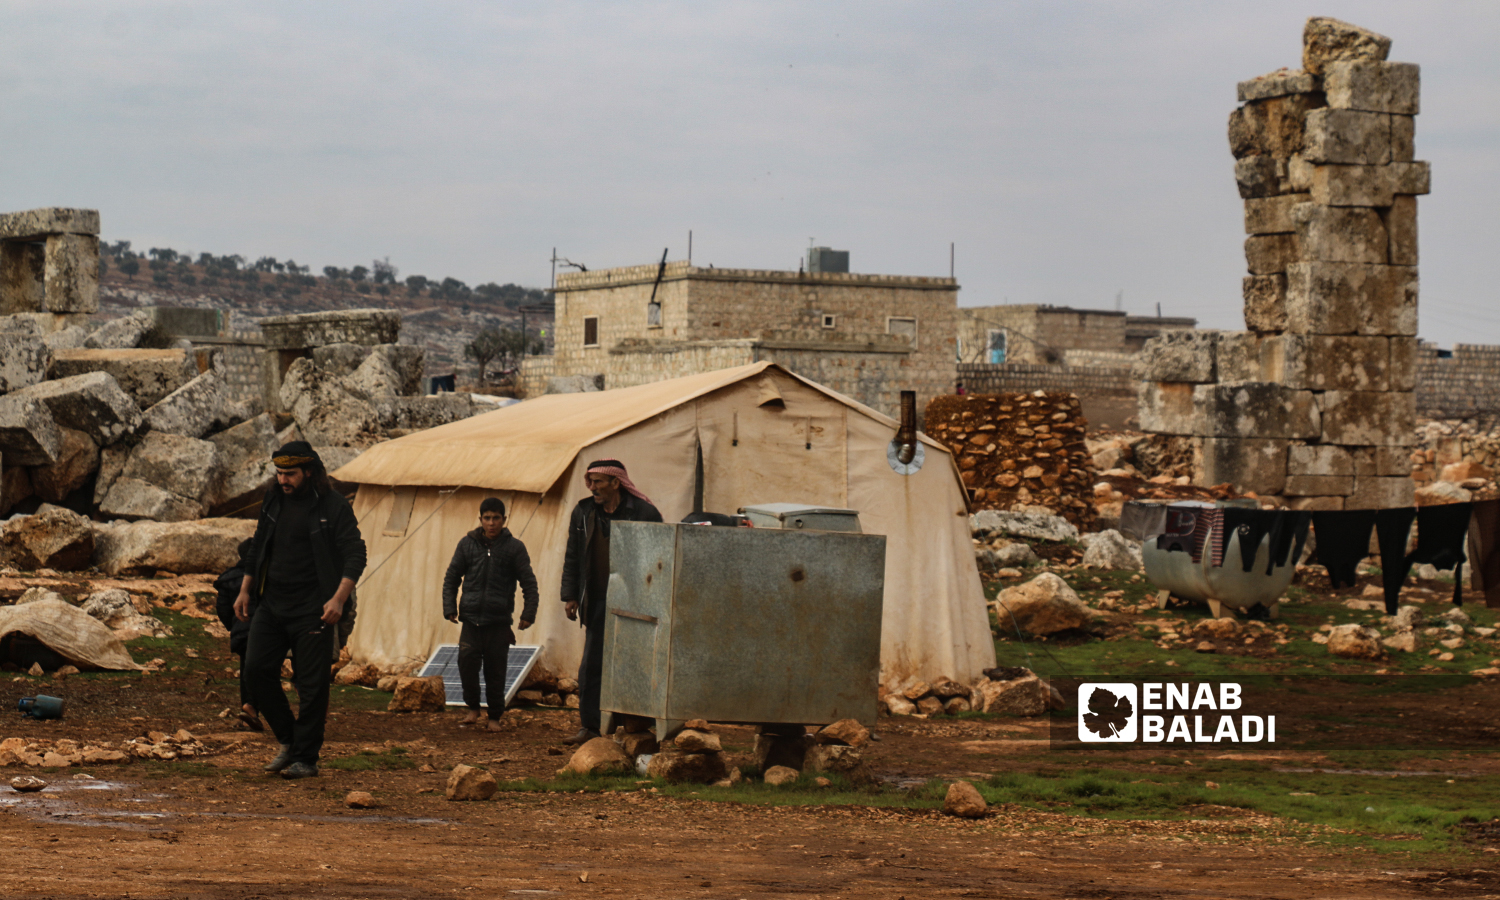 Displaced Syrians had their tents set up in the ancient Sarjableh area in the northern countryside of Idlib governorate - 22 January 2022 (Enab Baladi / Iyad Abdul Jawad)
